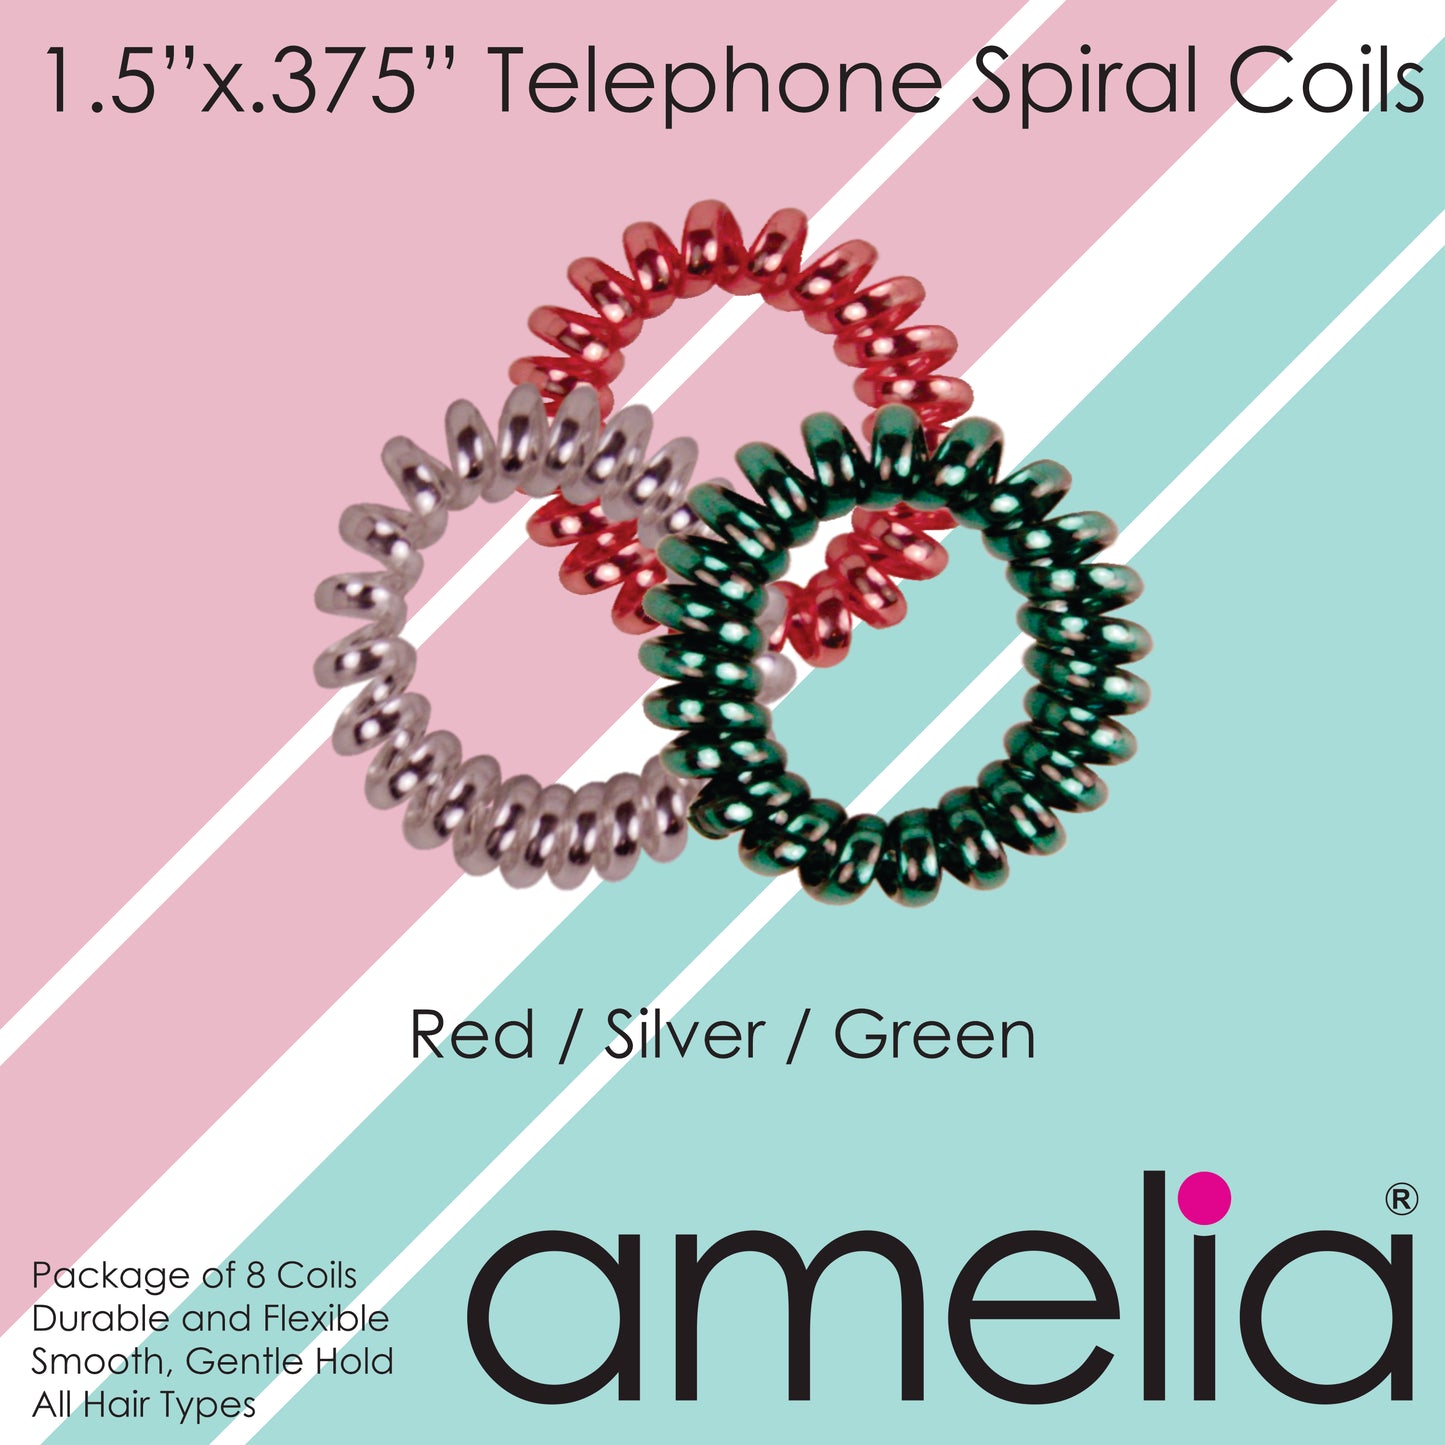 Amelia Beauty, 8 Small Shinny Elastic Hair Telephone Cord Coils, 1.5in Diameter Spiral Hair Ties, Strong Hold, Gentle on Hair, Red, Silver and Green